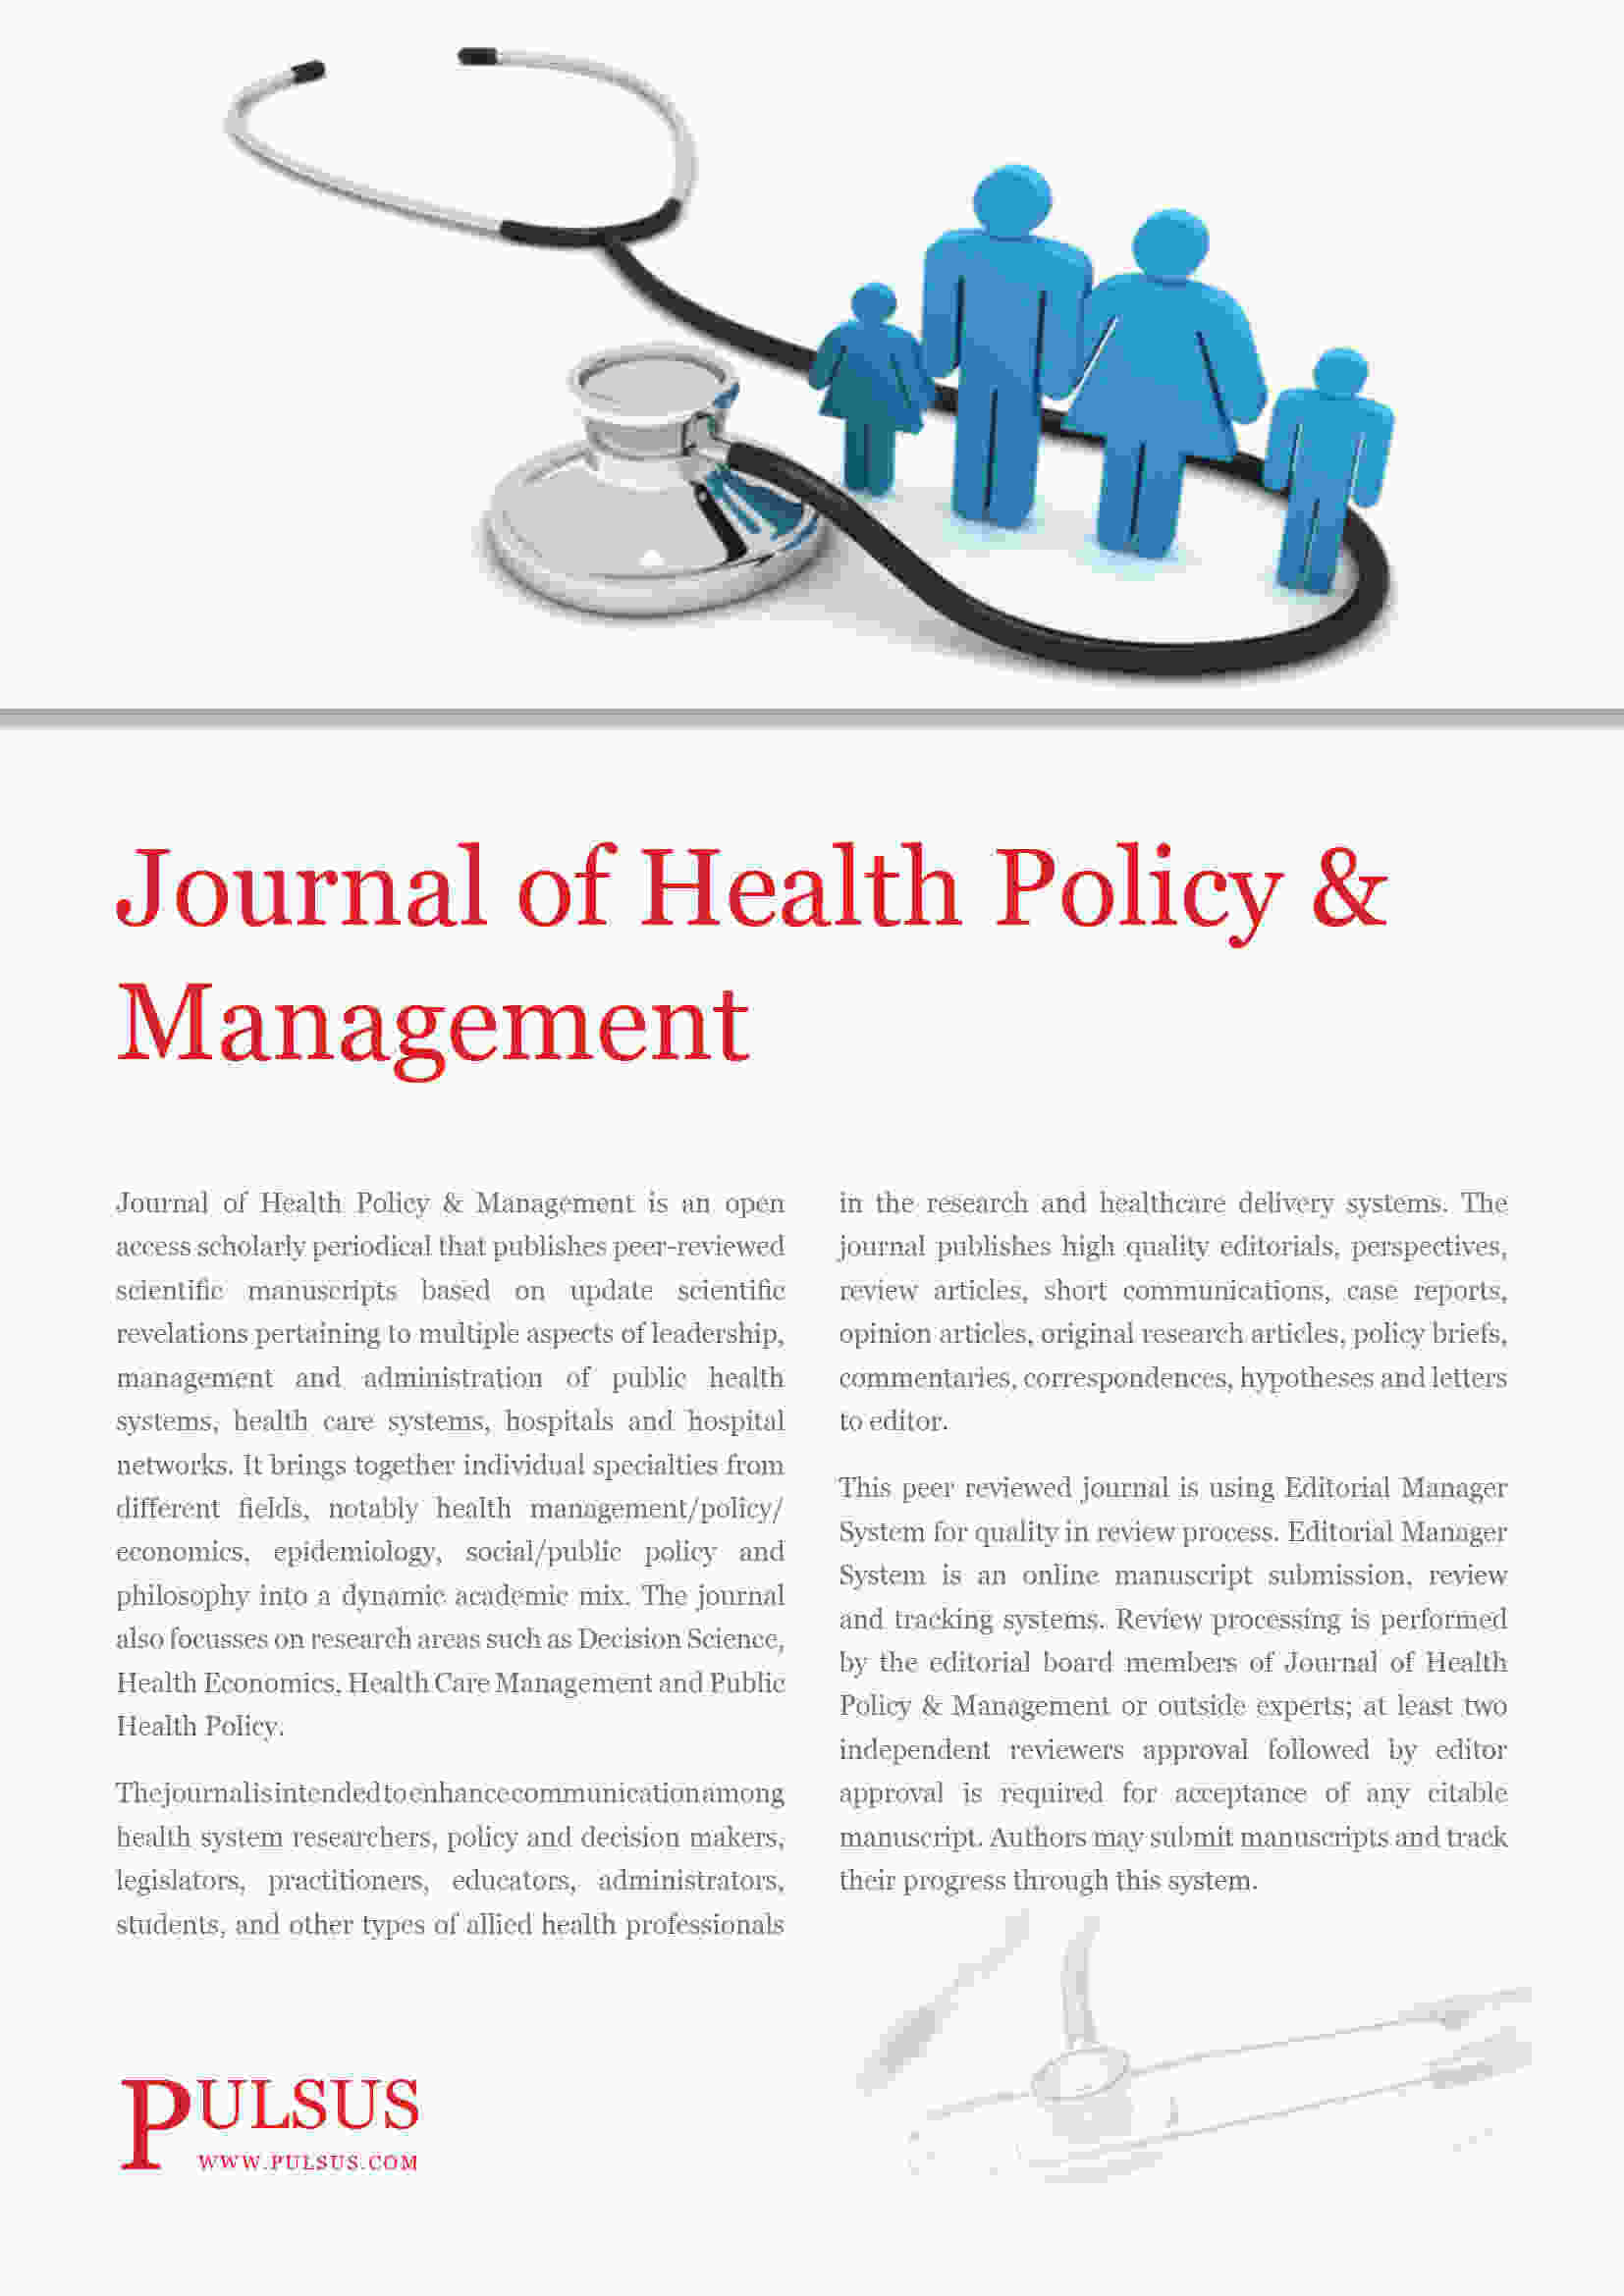 Journal of Health Policy & Management